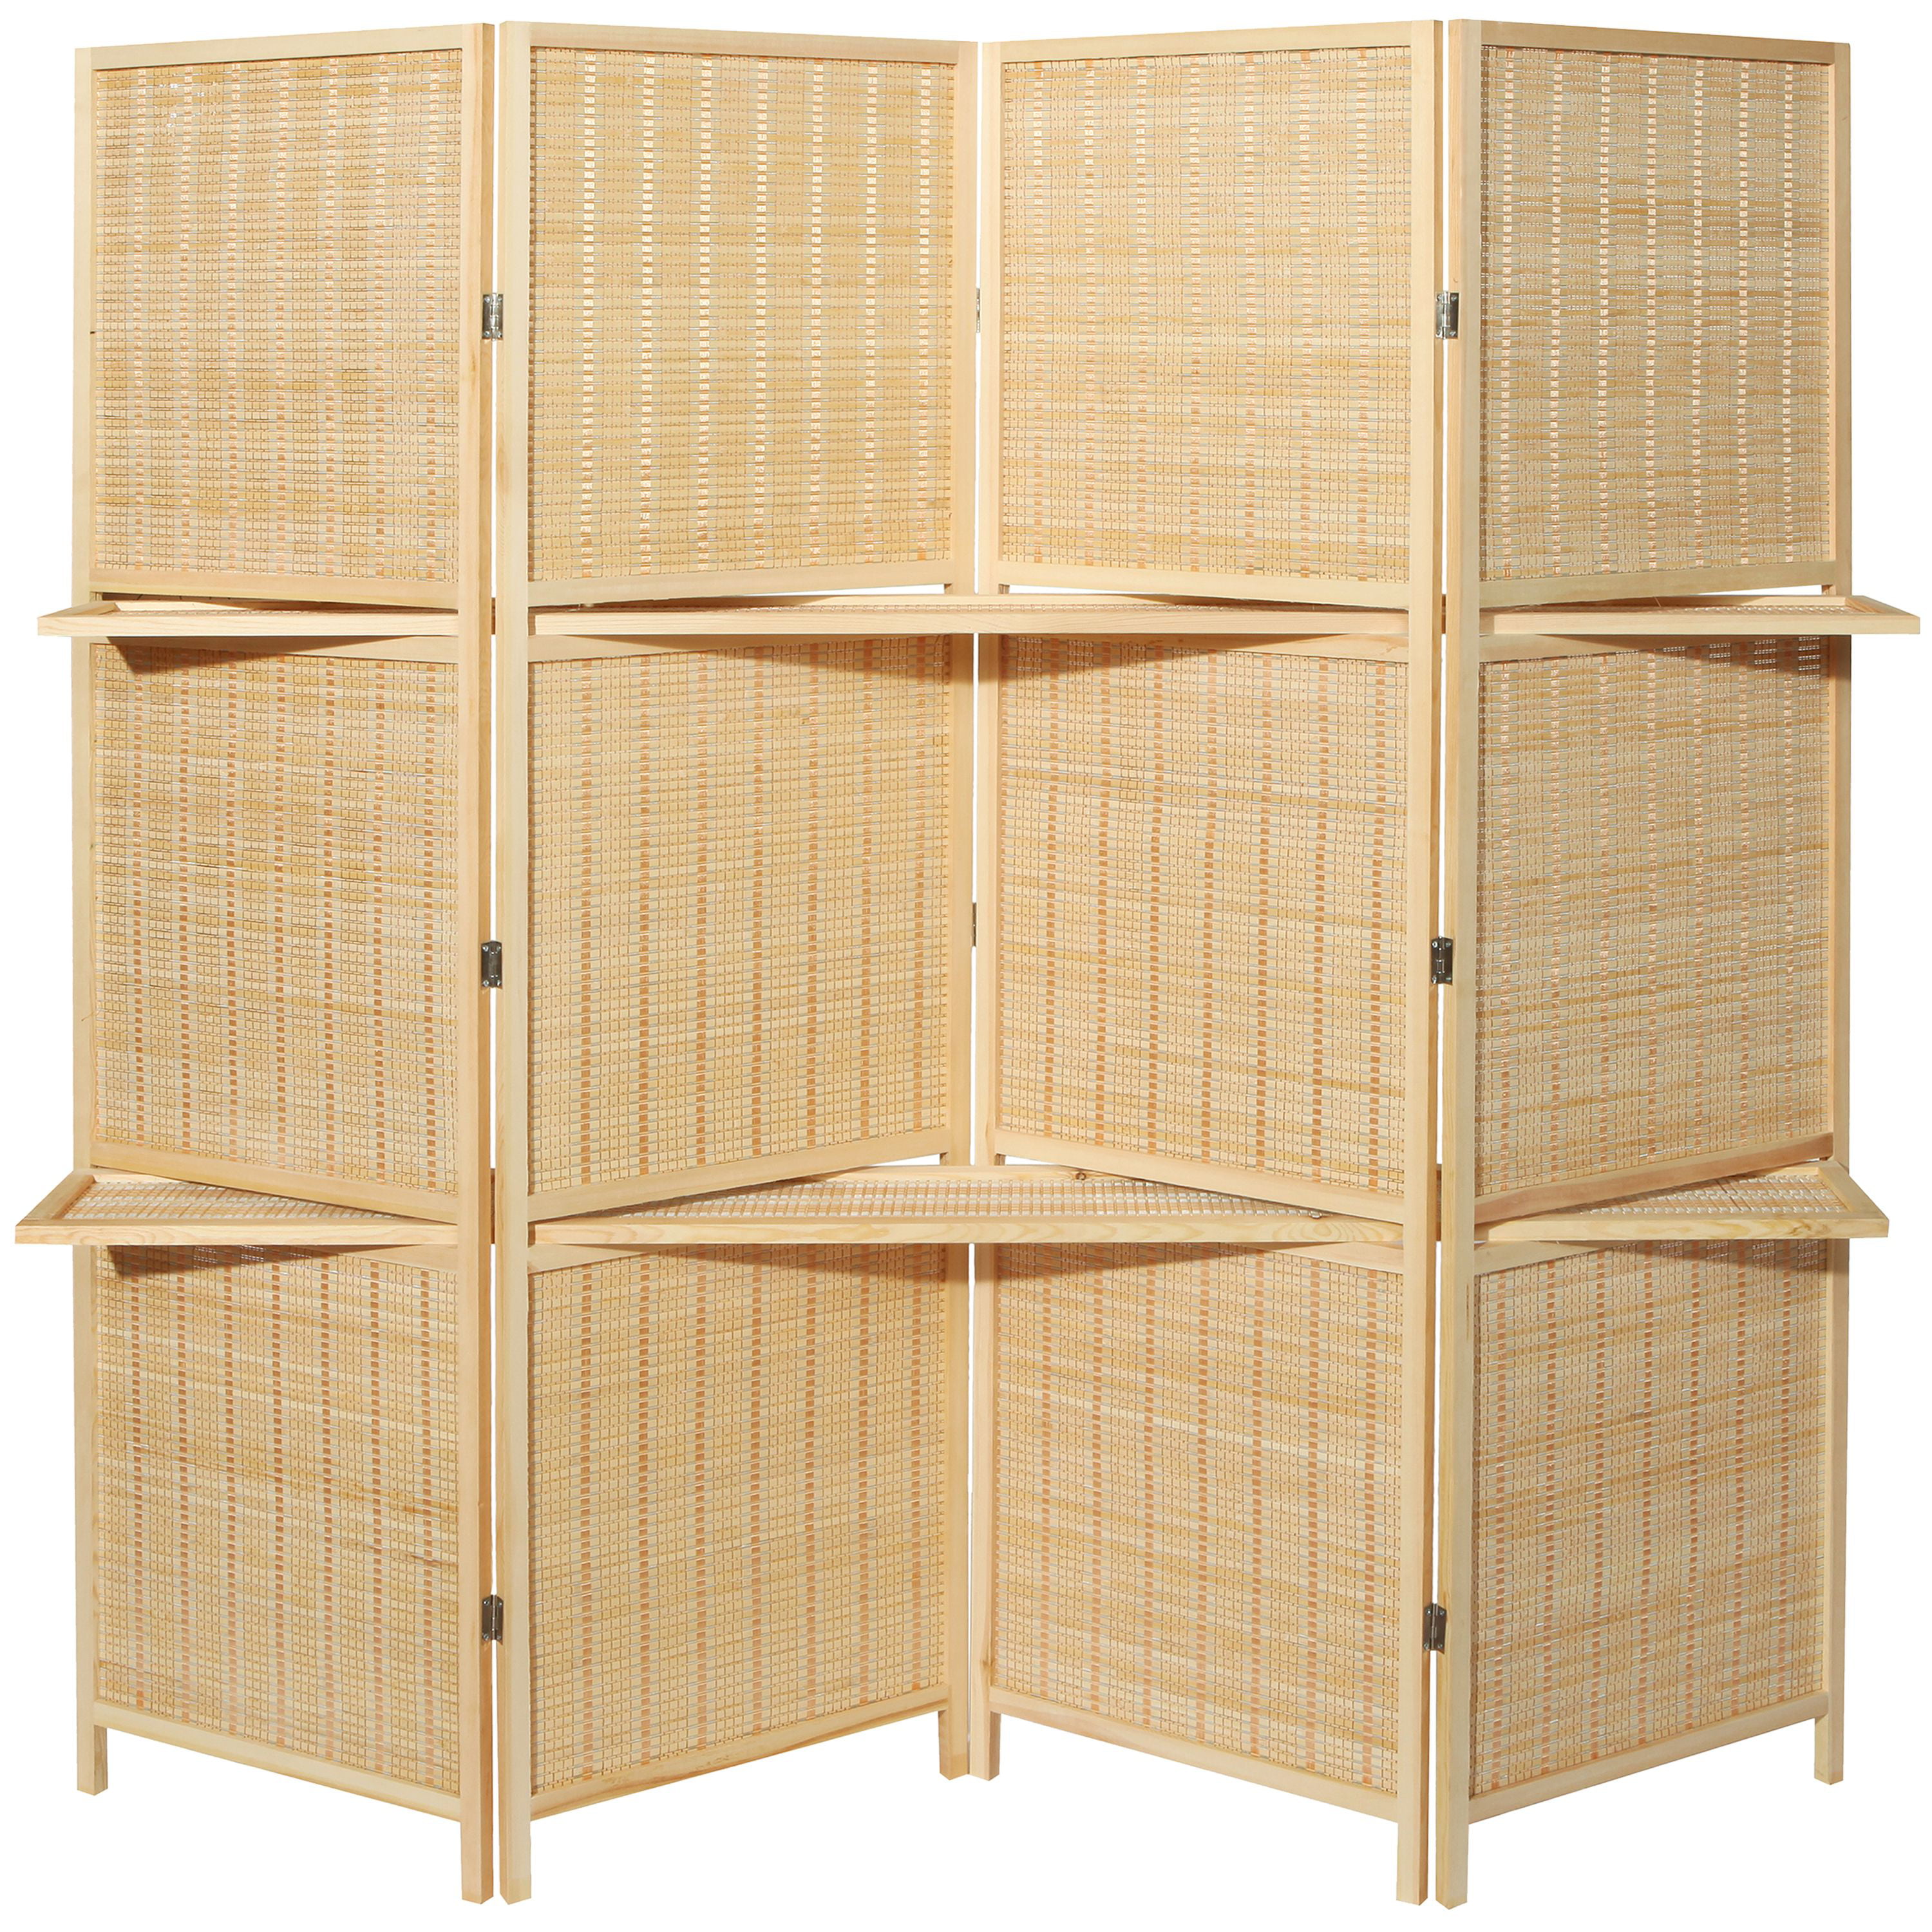 Brown MyGift Woven Wood 4 Panel Room Divider with 2 Removable Shelves